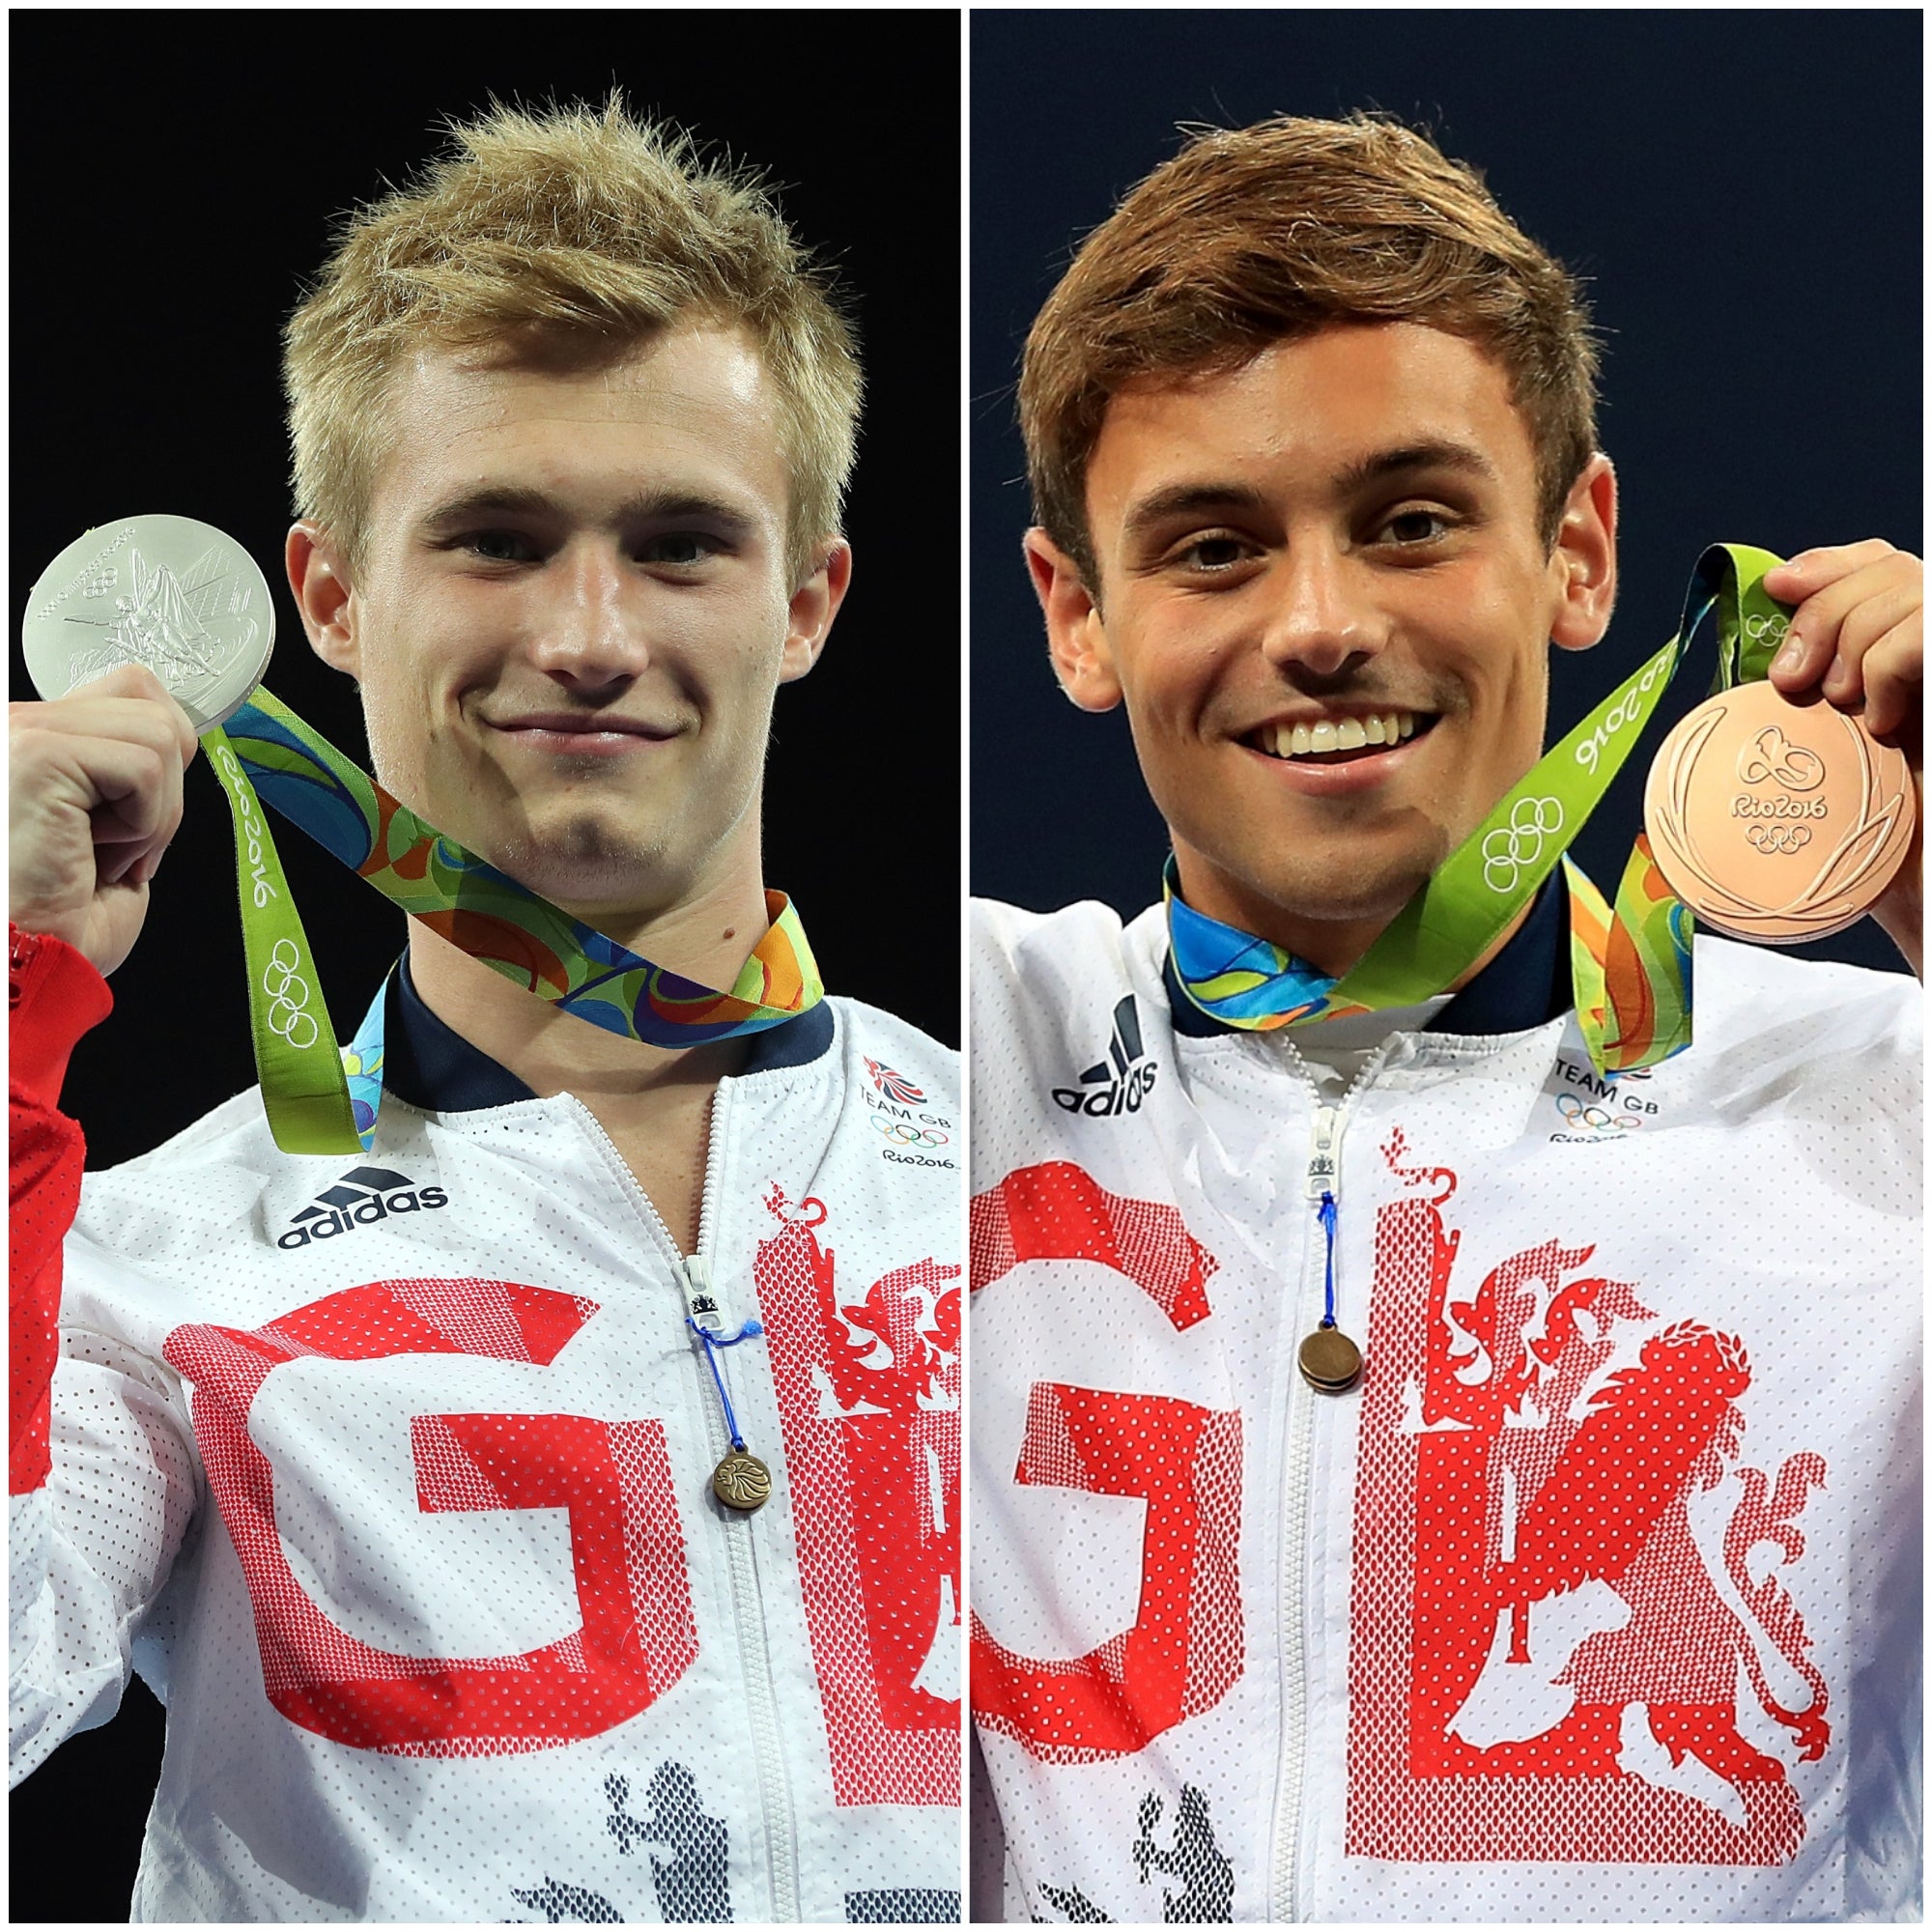 Jack Laugher and Tom Daley